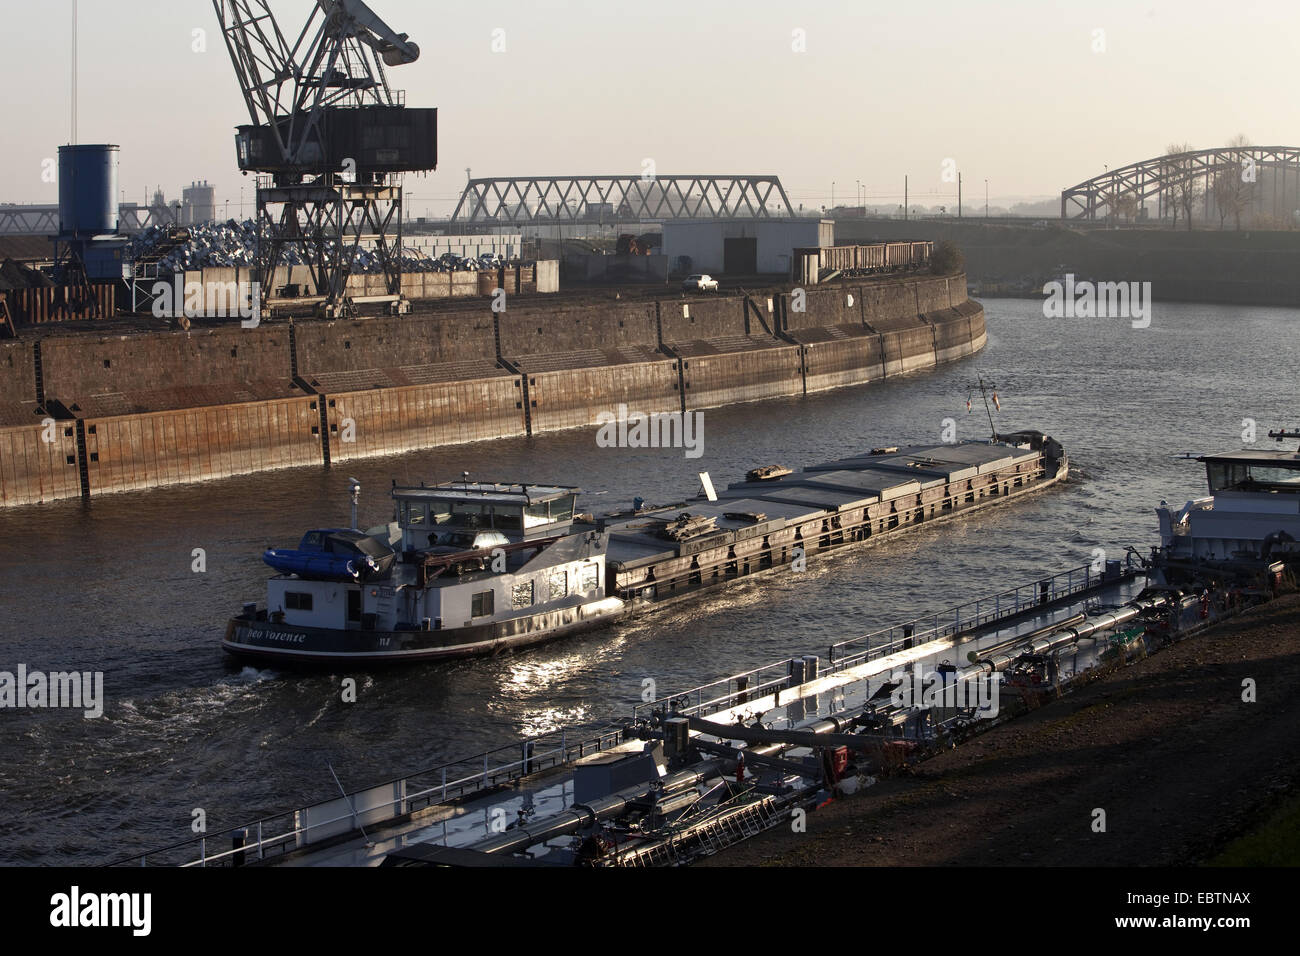 dockside crane of inner harbour and transport ship in canal, Germany, North Rhine-Westphalia, Ruhr Area, Duisburg Stock Photo